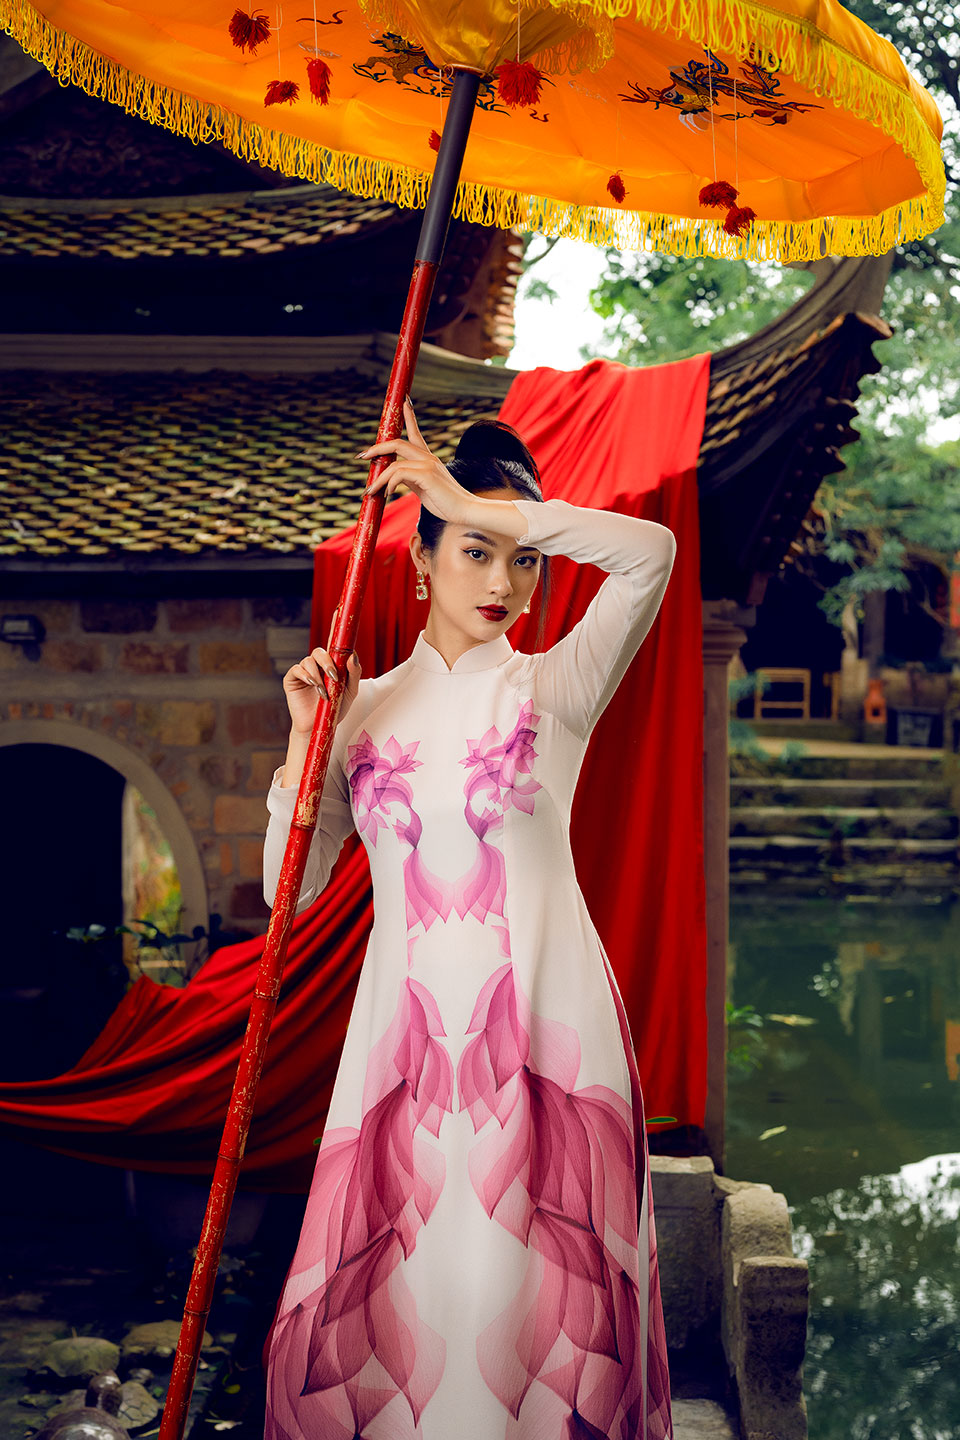 Traditional Vietnamese dress with pink lotus pattern